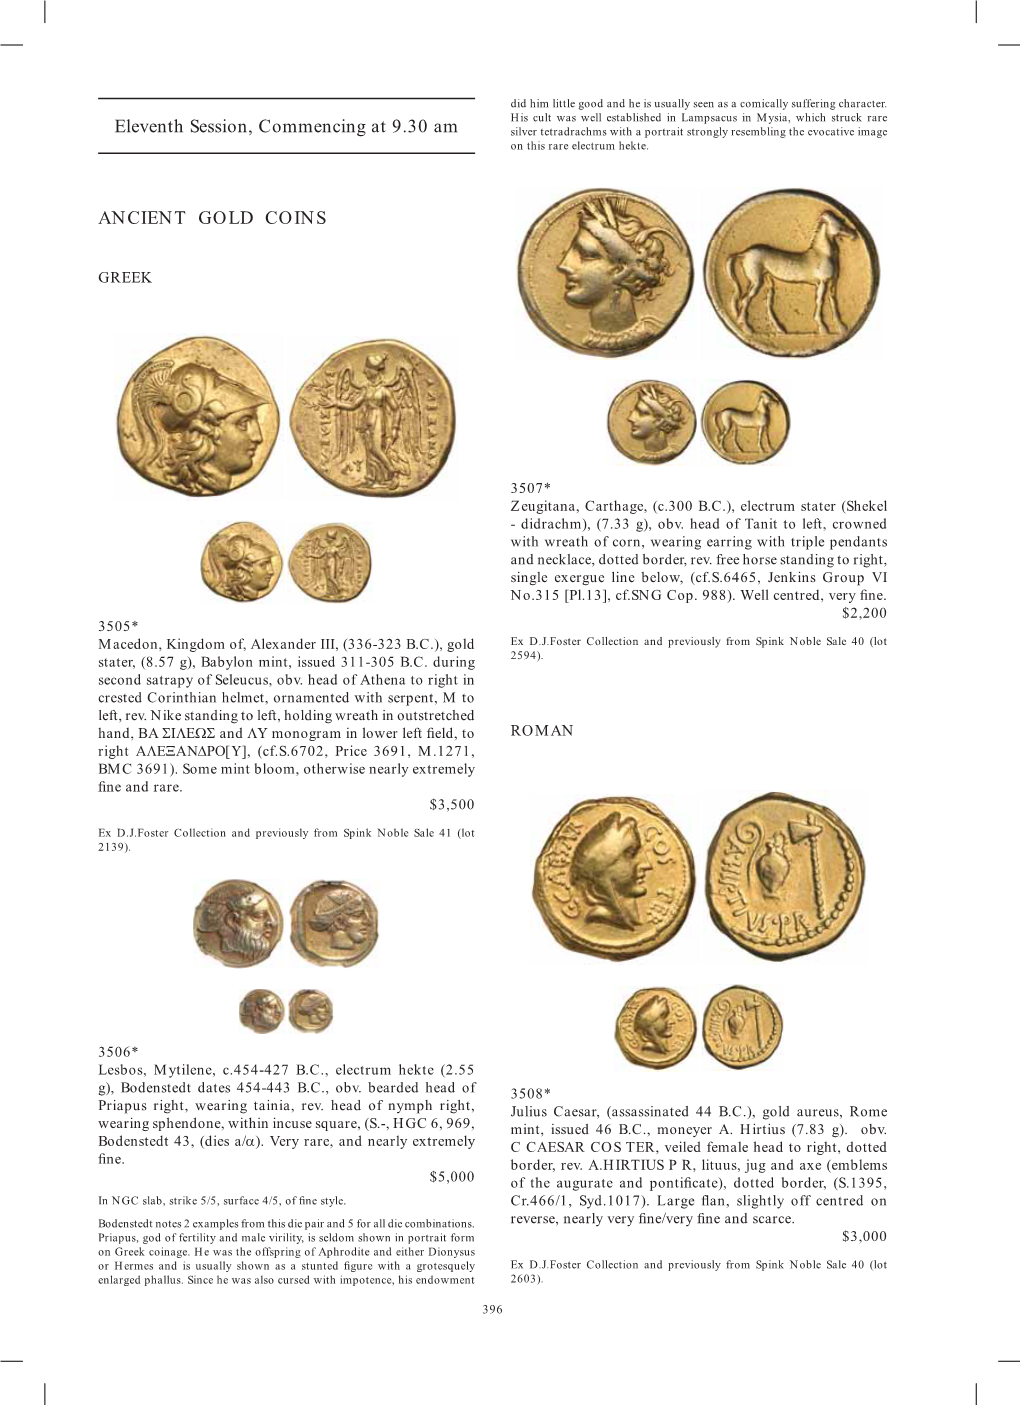 Eleventh Session, Commencing at 9.30 Am ANCIENT GOLD COINS